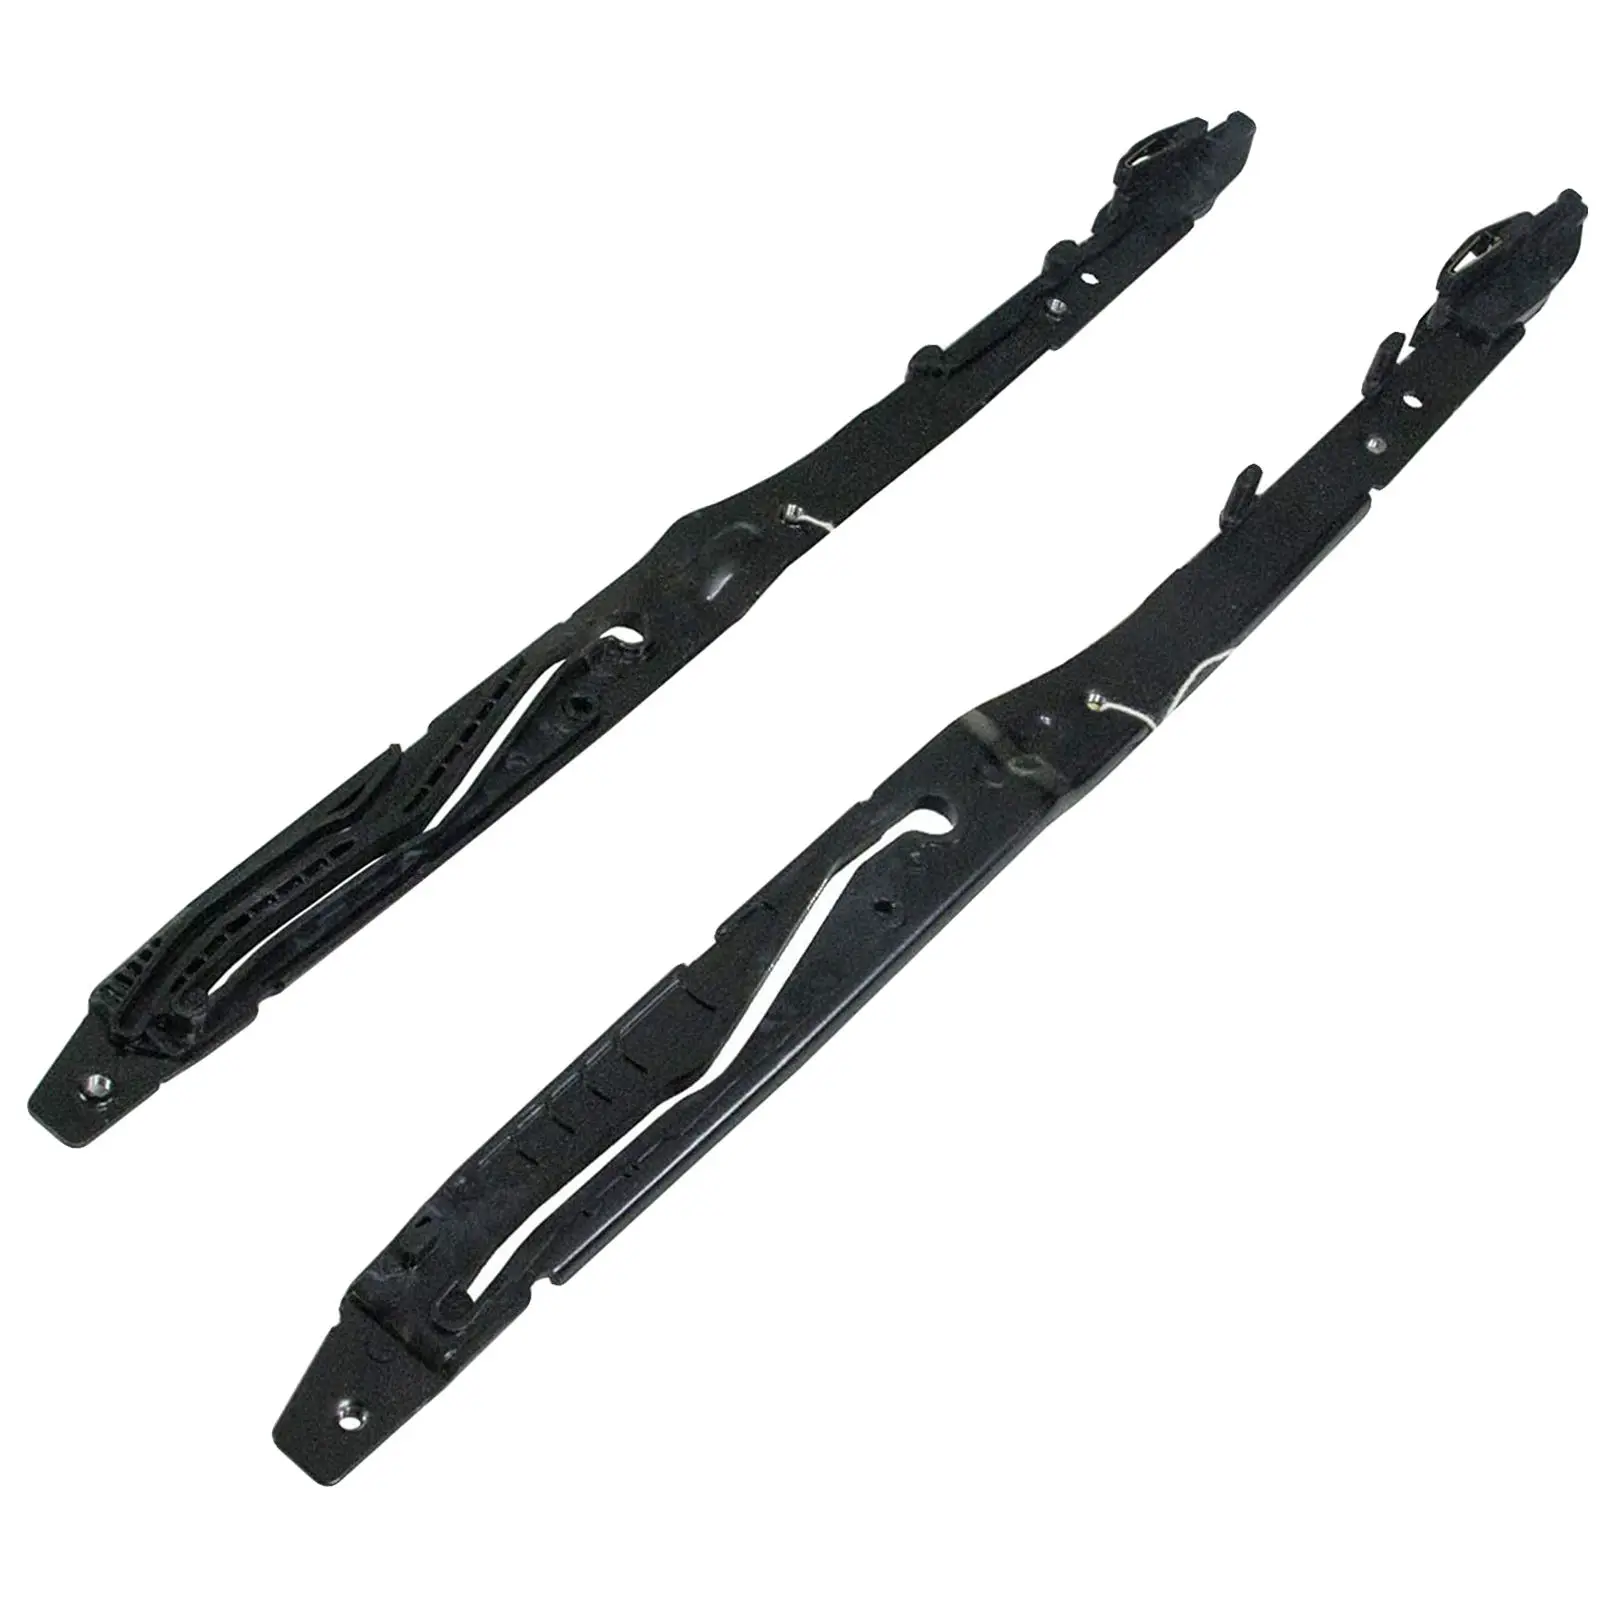 

2Pcs Sunroof Track Assembly Repair Kit FL3Z-1651071-A Replaces for Ford F250 F350 F450 2017-2019, High Reliability